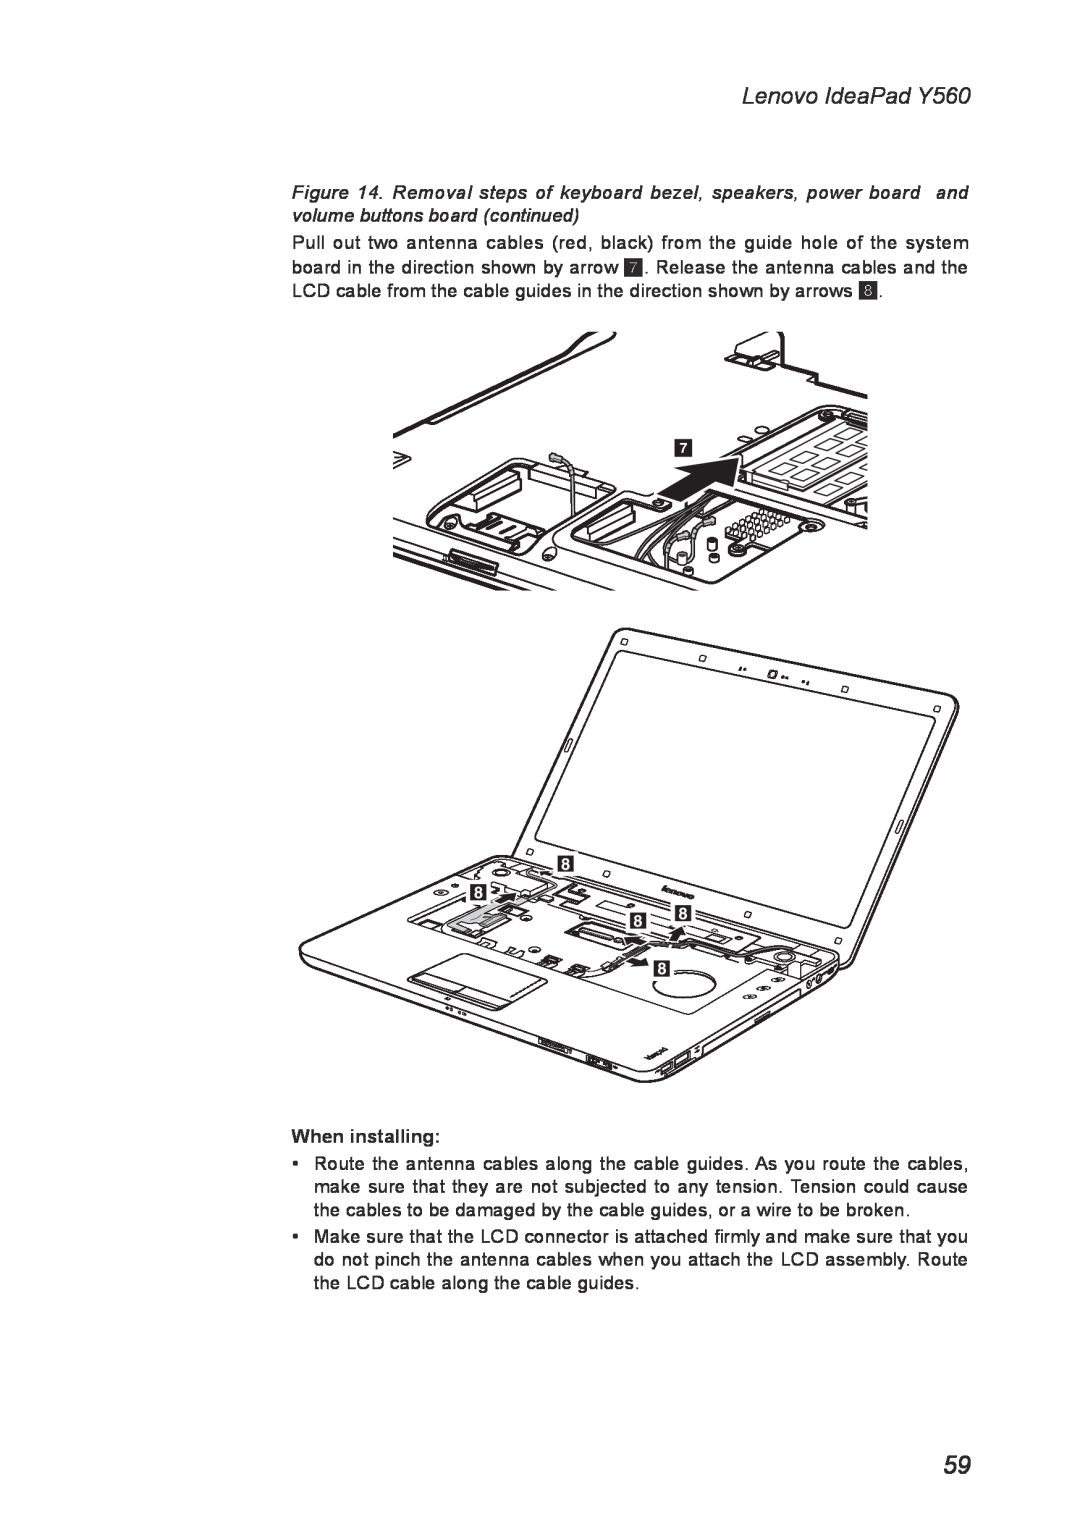 Lenovo Lenovo IdeaPad Y560, Pull out two antenna cables red, black from the guide hole of the system, When installing 